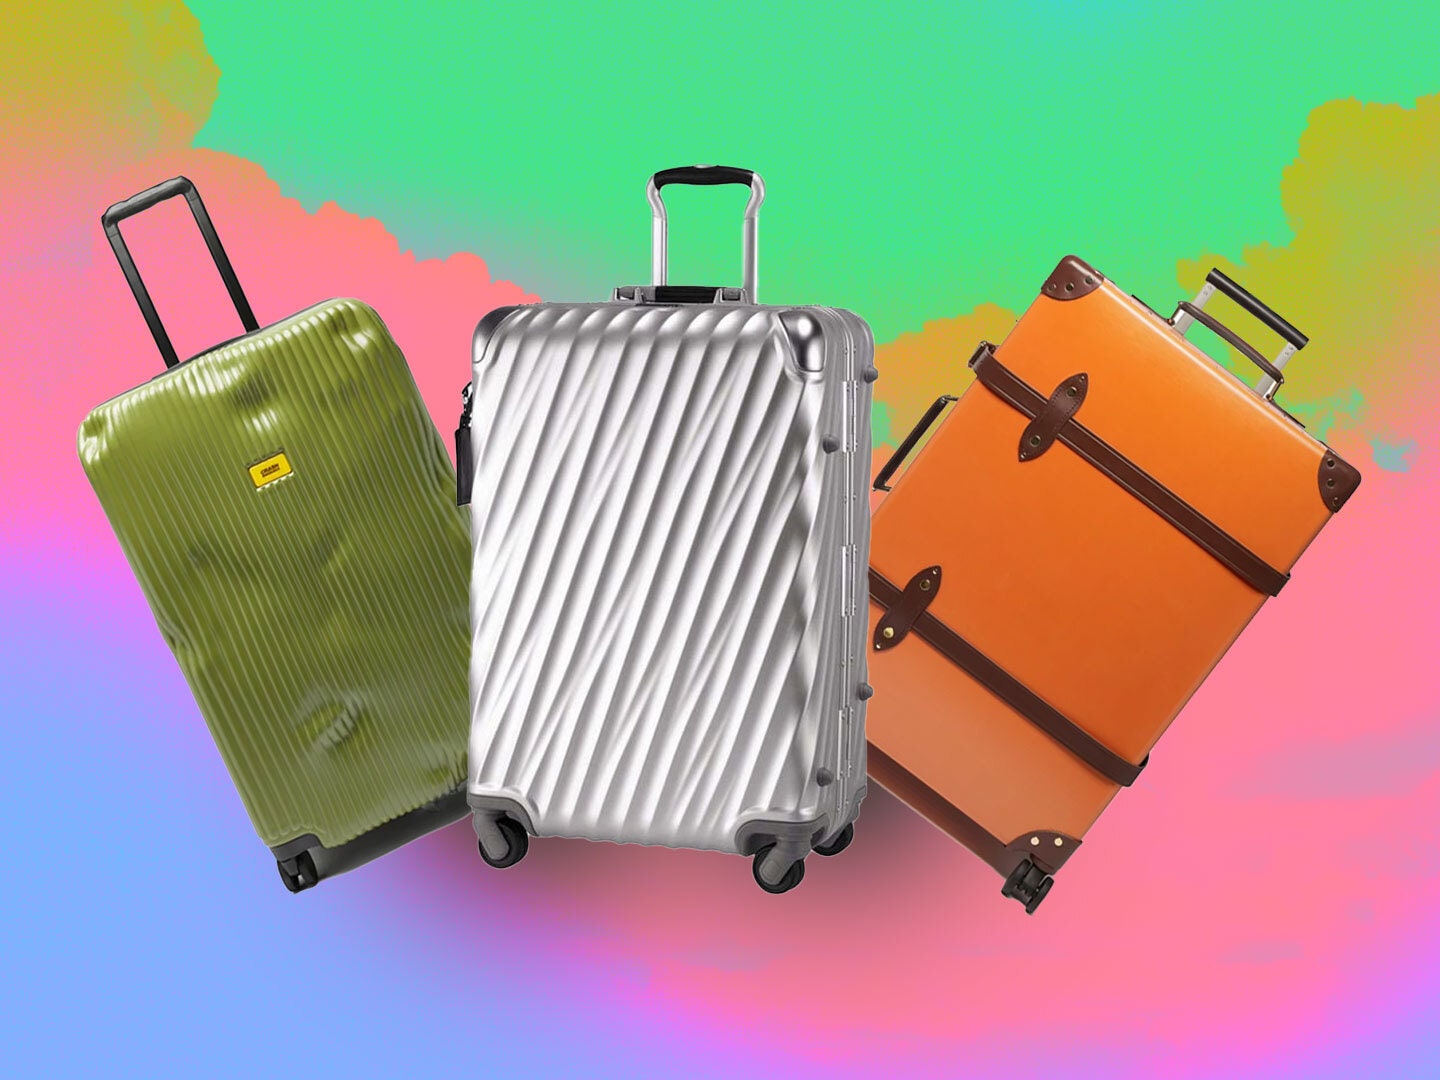 The 12 best luggage brands, explained by GQ's globetrotting travel editors